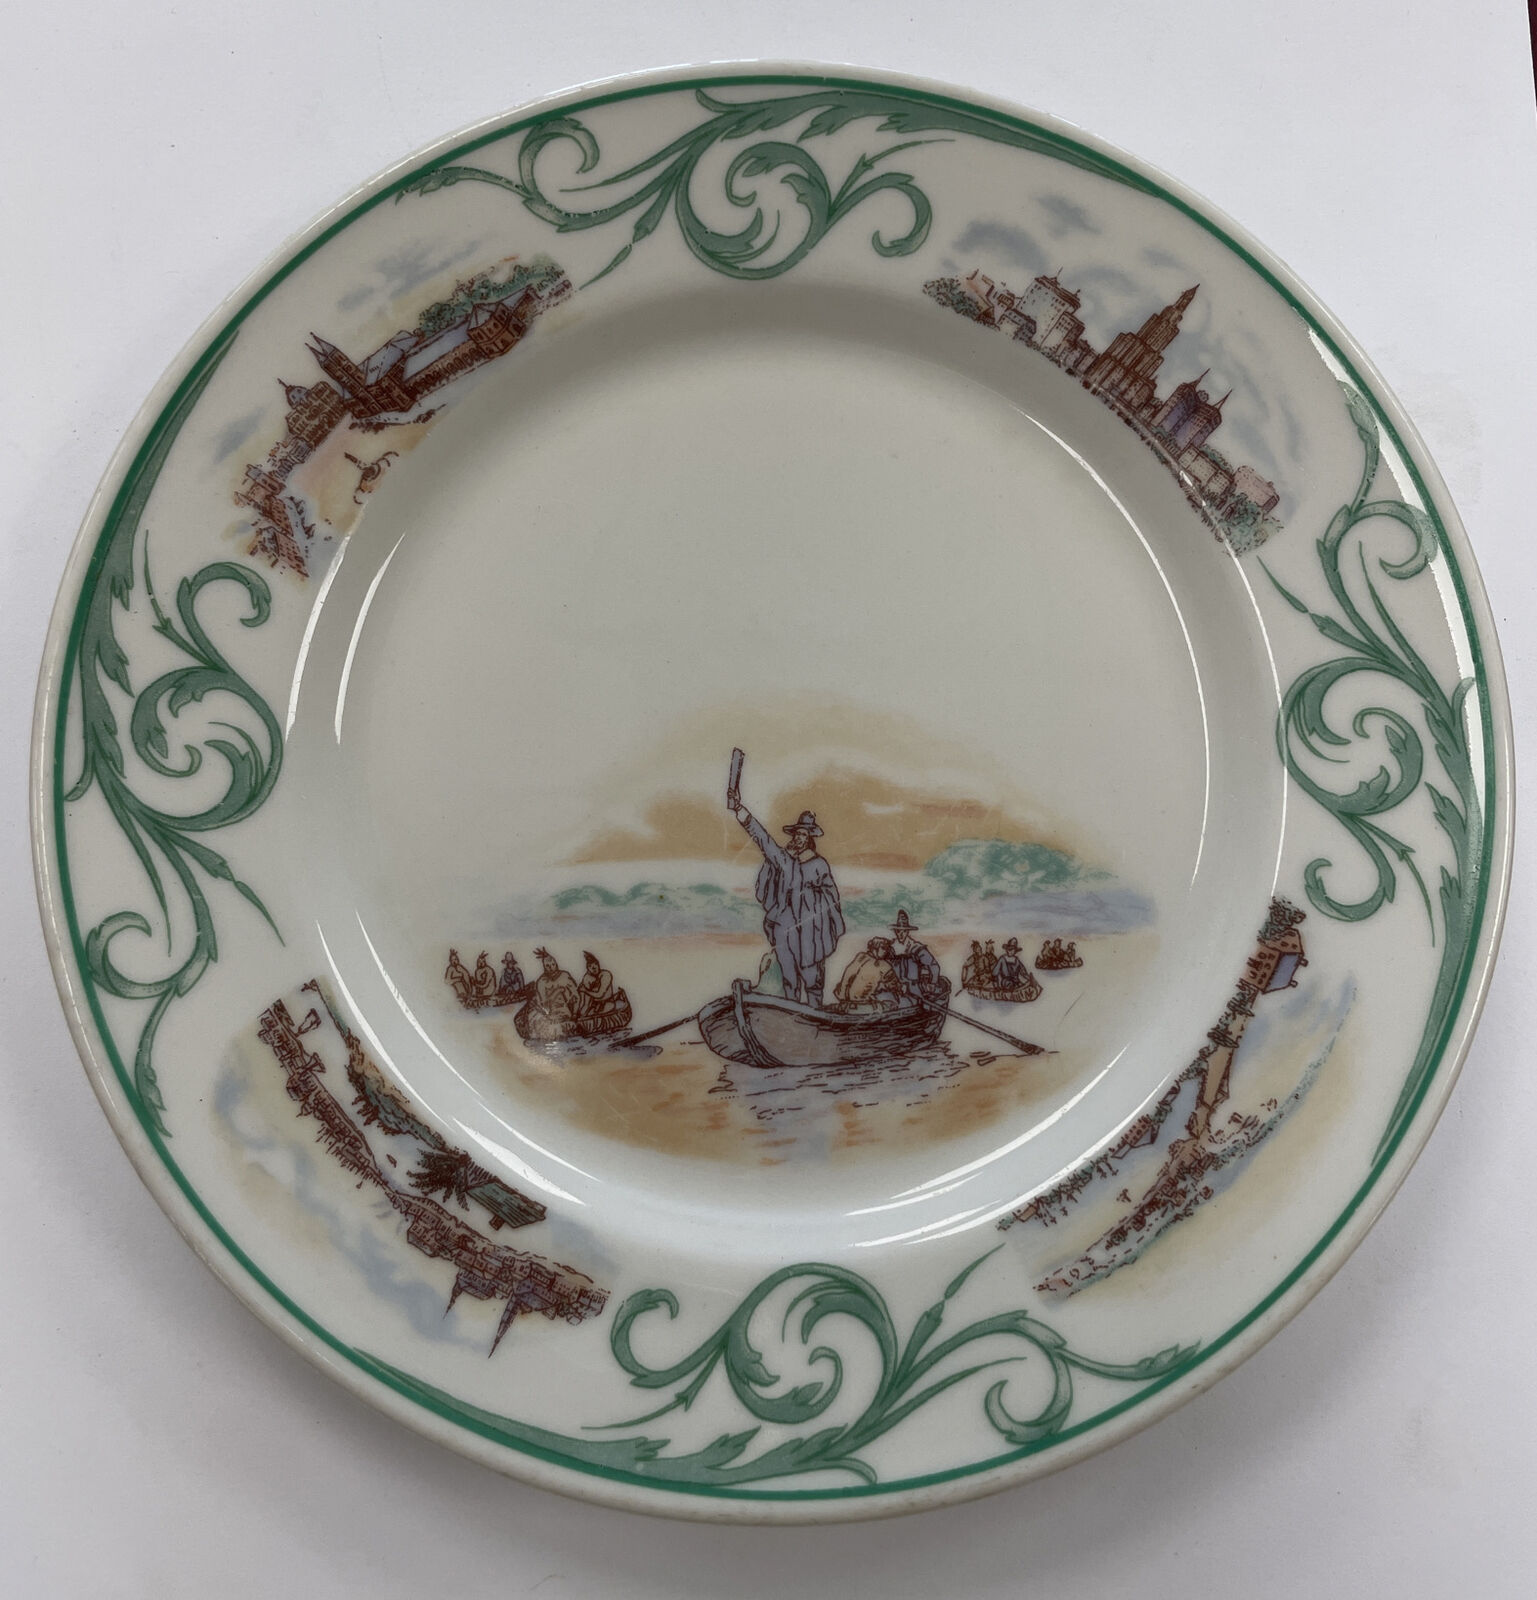 VINTAGE LAMBERTON SCAMMELL PORCELAIN PLATE.PILGRIMS AND NATIVE AMERICANS.RARE